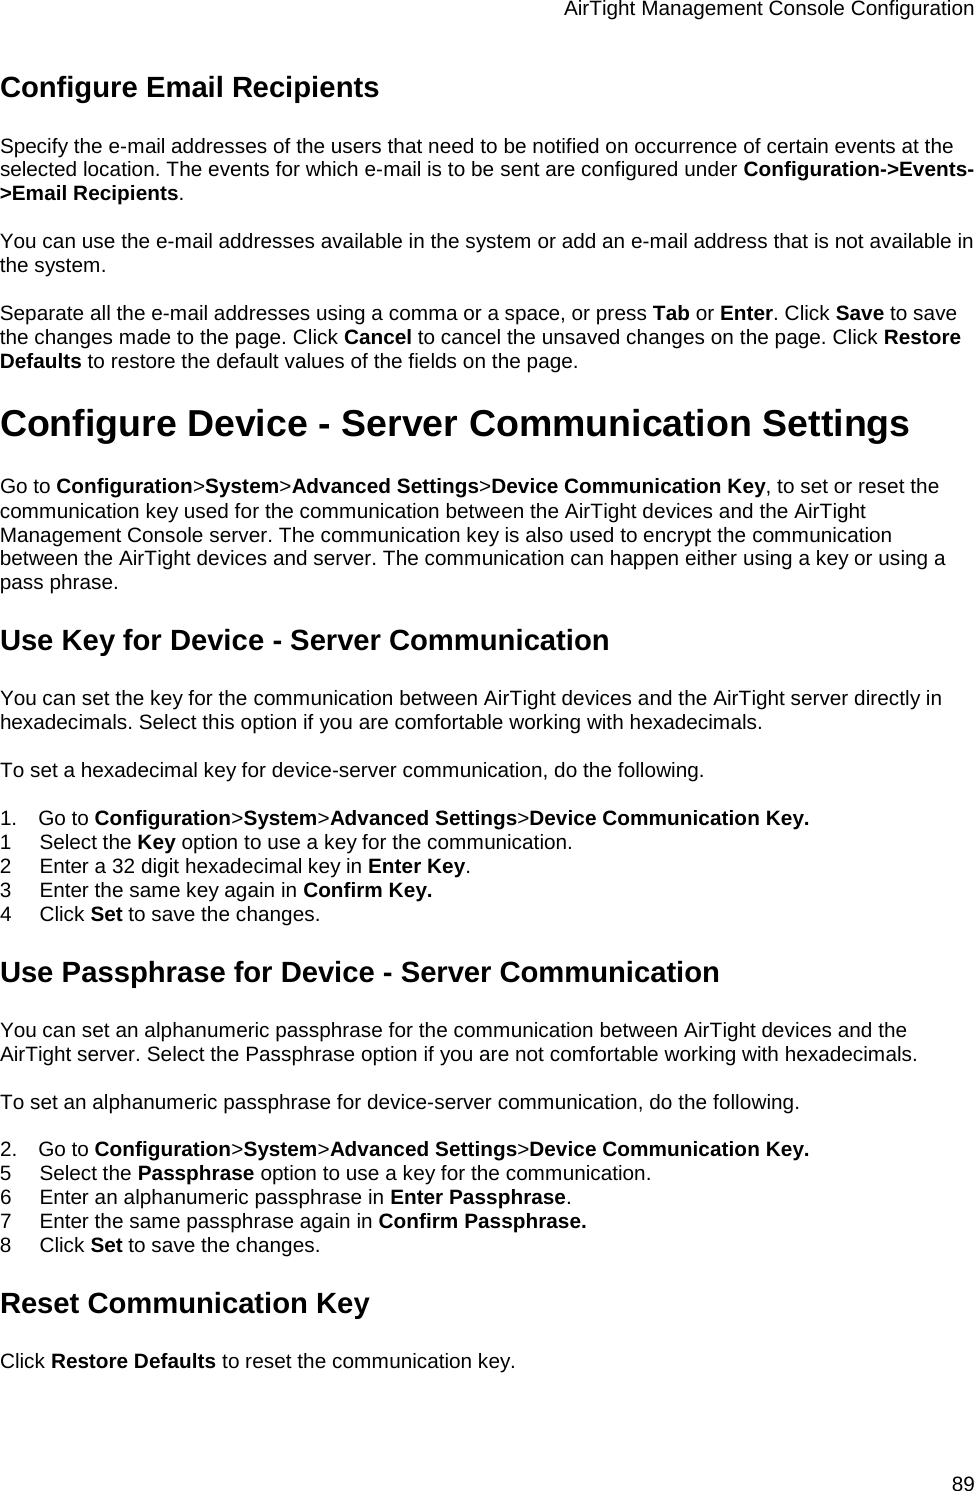 AirTight Management Console Configuration 89 Configure Email Recipients Specify the e-mail addresses of the users that need to be notified on occurrence of certain events at the selected location. The events for which e-mail is to be sent are configured under Configuration-&gt;Events-&gt;Email Recipients.   You can use the e-mail addresses available in the system or add an e-mail address that is not available in the system.    Separate all the e-mail addresses using a comma or a space, or press Tab or Enter. Click Save to save the changes made to the page. Click Cancel to cancel the unsaved changes on the page. Click Restore Defaults to restore the default values of the fields on the page. Configure Device - Server Communication Settings Go to Configuration&gt;System&gt;Advanced Settings&gt;Device Communication Key, to set or reset the communication key used for the communication between the AirTight devices and the AirTight Management Console server. The communication key is also used to encrypt the communication between the AirTight devices and server. The communication can happen either using a key or using a pass phrase. Use Key for Device - Server Communication You can set the key for the communication between AirTight devices and the AirTight server directly in hexadecimals. Select this option if you are comfortable working with hexadecimals.   To set a hexadecimal key for device-server communication, do the following.   1.      Go to Configuration&gt;System&gt;Advanced Settings&gt;Device Communication Key. 1        Select the Key option to use a key for the communication.  2        Enter a 32 digit hexadecimal key in Enter Key.  3        Enter the same key again in Confirm Key. 4        Click Set to save the changes. Use Passphrase for Device - Server Communication You can set an alphanumeric passphrase for the communication between AirTight devices and the AirTight server. Select the Passphrase option if you are not comfortable working with hexadecimals.   To set an alphanumeric passphrase for device-server communication, do the following.   2.      Go to Configuration&gt;System&gt;Advanced Settings&gt;Device Communication Key. 5        Select the Passphrase option to use a key for the communication.  6        Enter an alphanumeric passphrase in Enter Passphrase.  7        Enter the same passphrase again in Confirm Passphrase. 8        Click Set to save the changes. Reset Communication Key Click Restore Defaults to reset the communication key. 